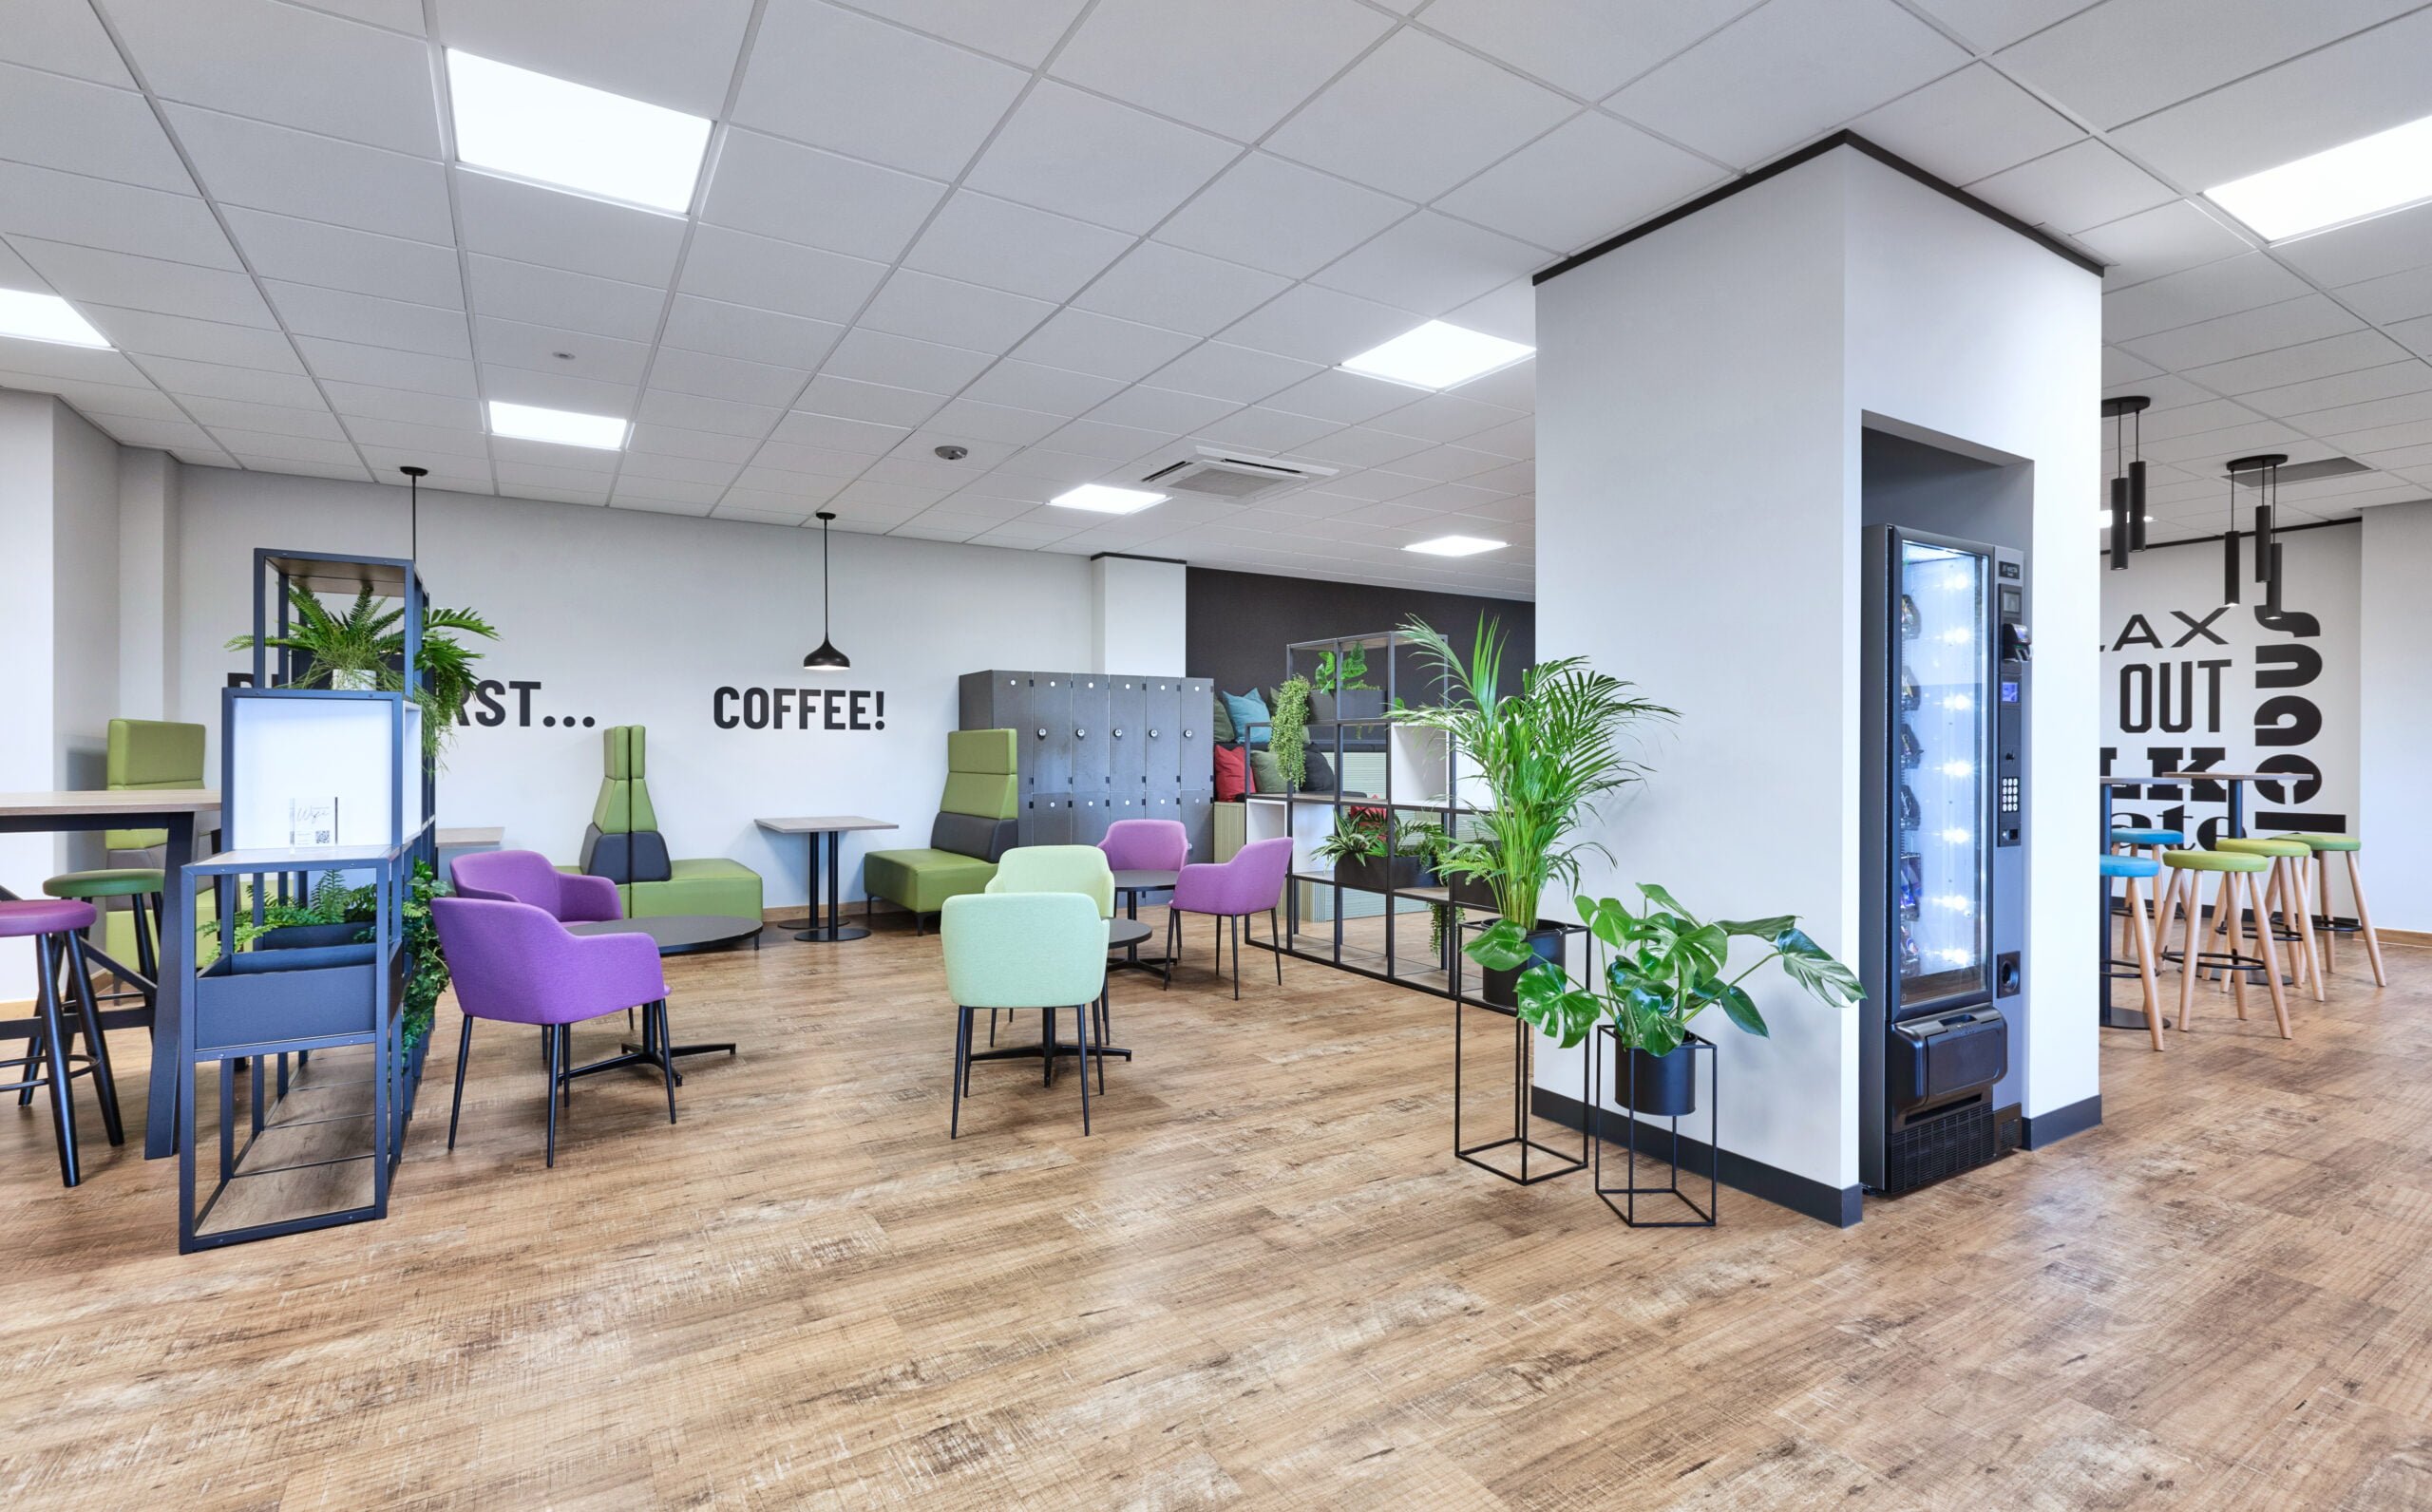 breakout space with biophilic elements, a vending machine, wooden flooring and colourful furniture